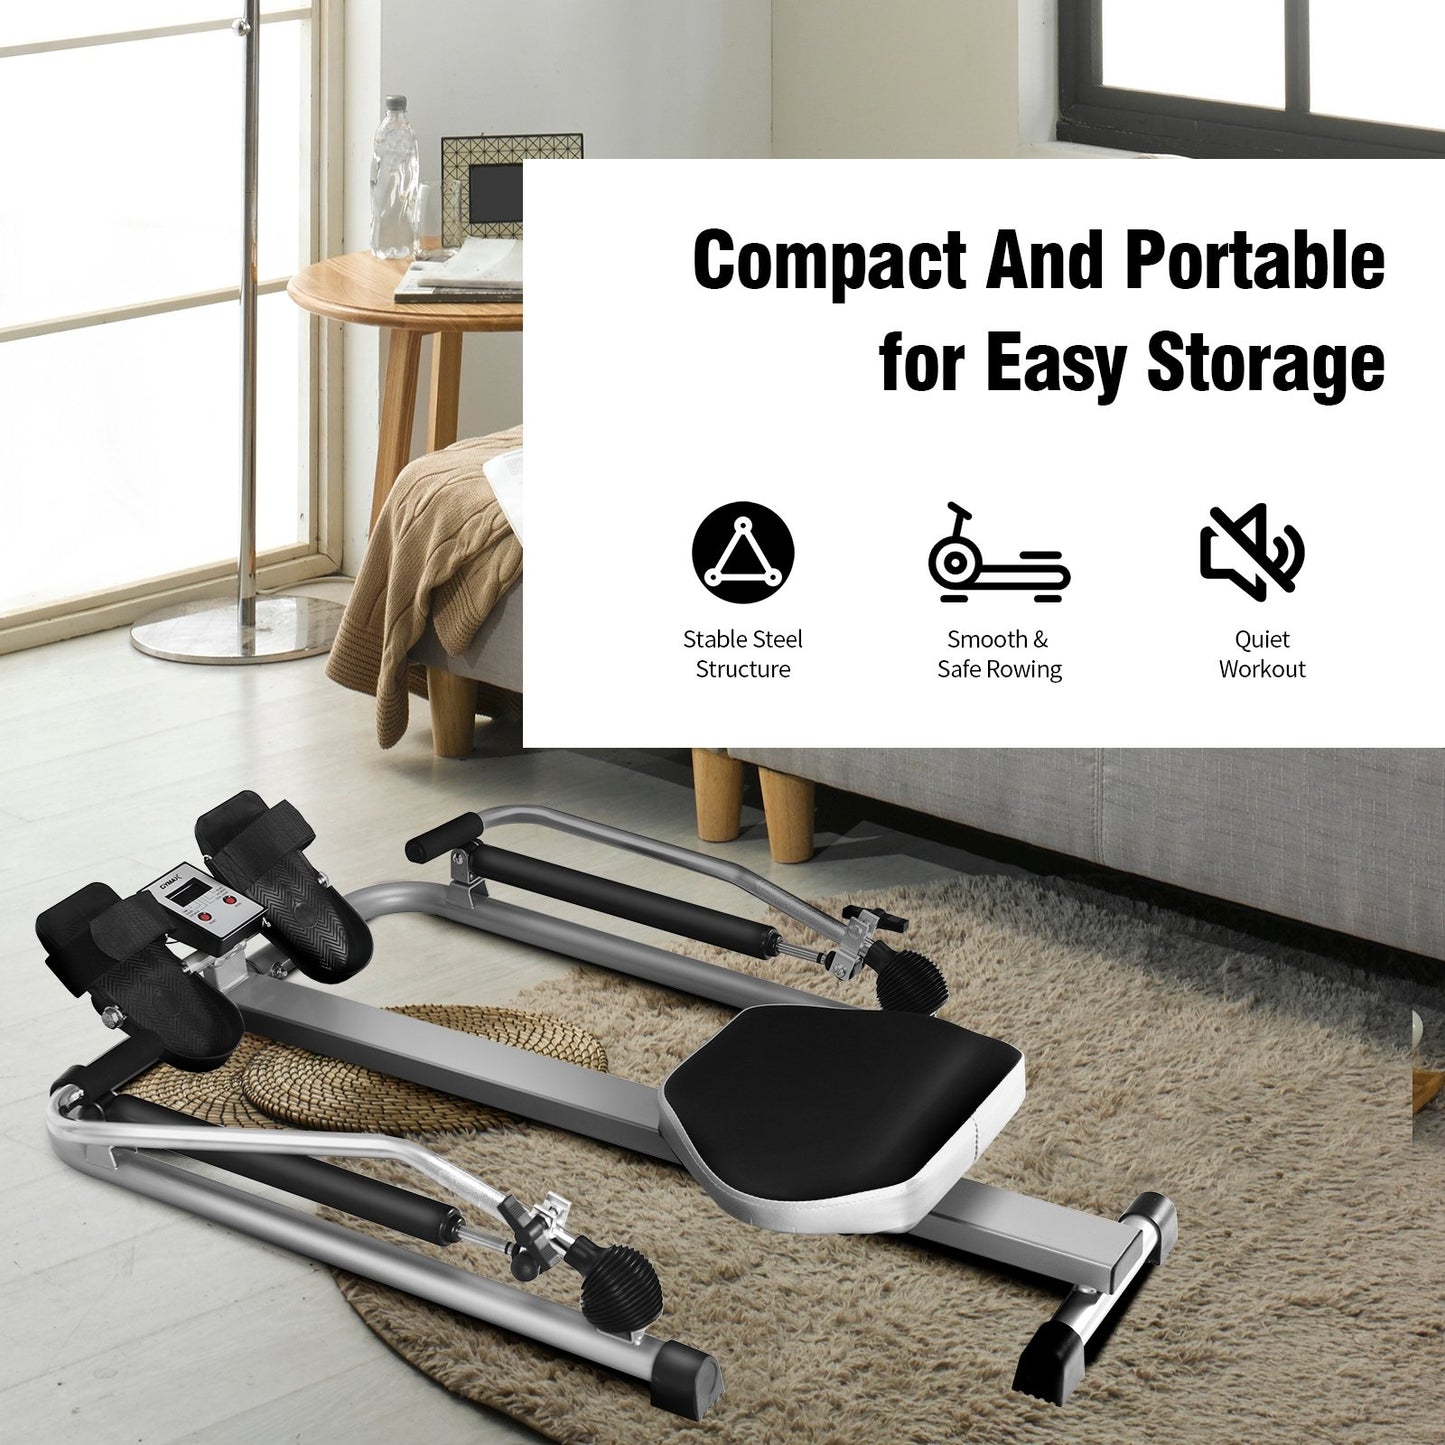 Exercise Adjustable Double Hydraulic Resistance Rowing Machine, Black at Gallery Canada